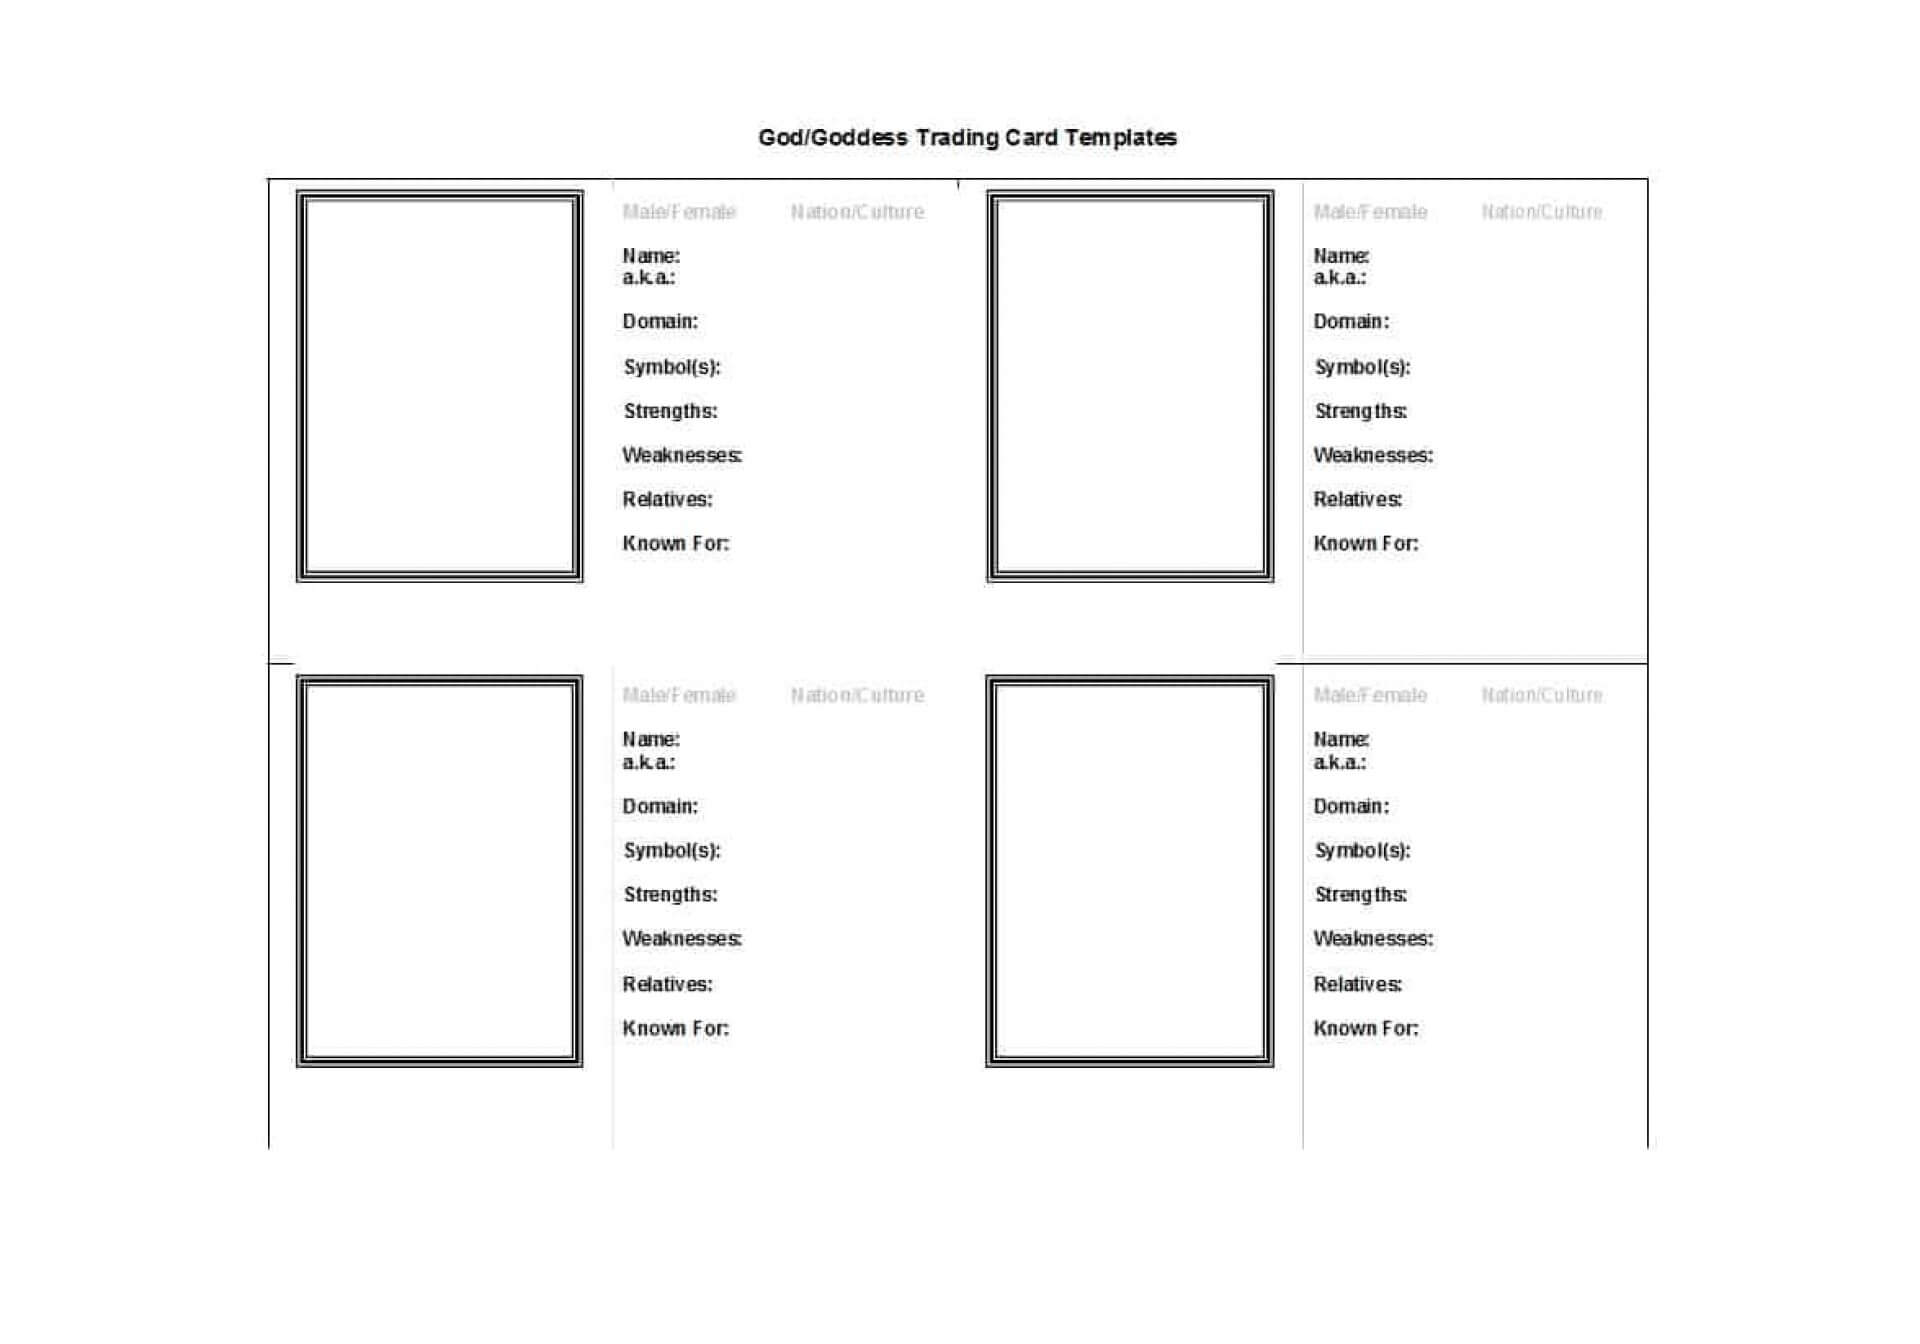 008 Baseball Trading Card Template Free Download Ideas Blank Intended For Superhero Trading Card Template